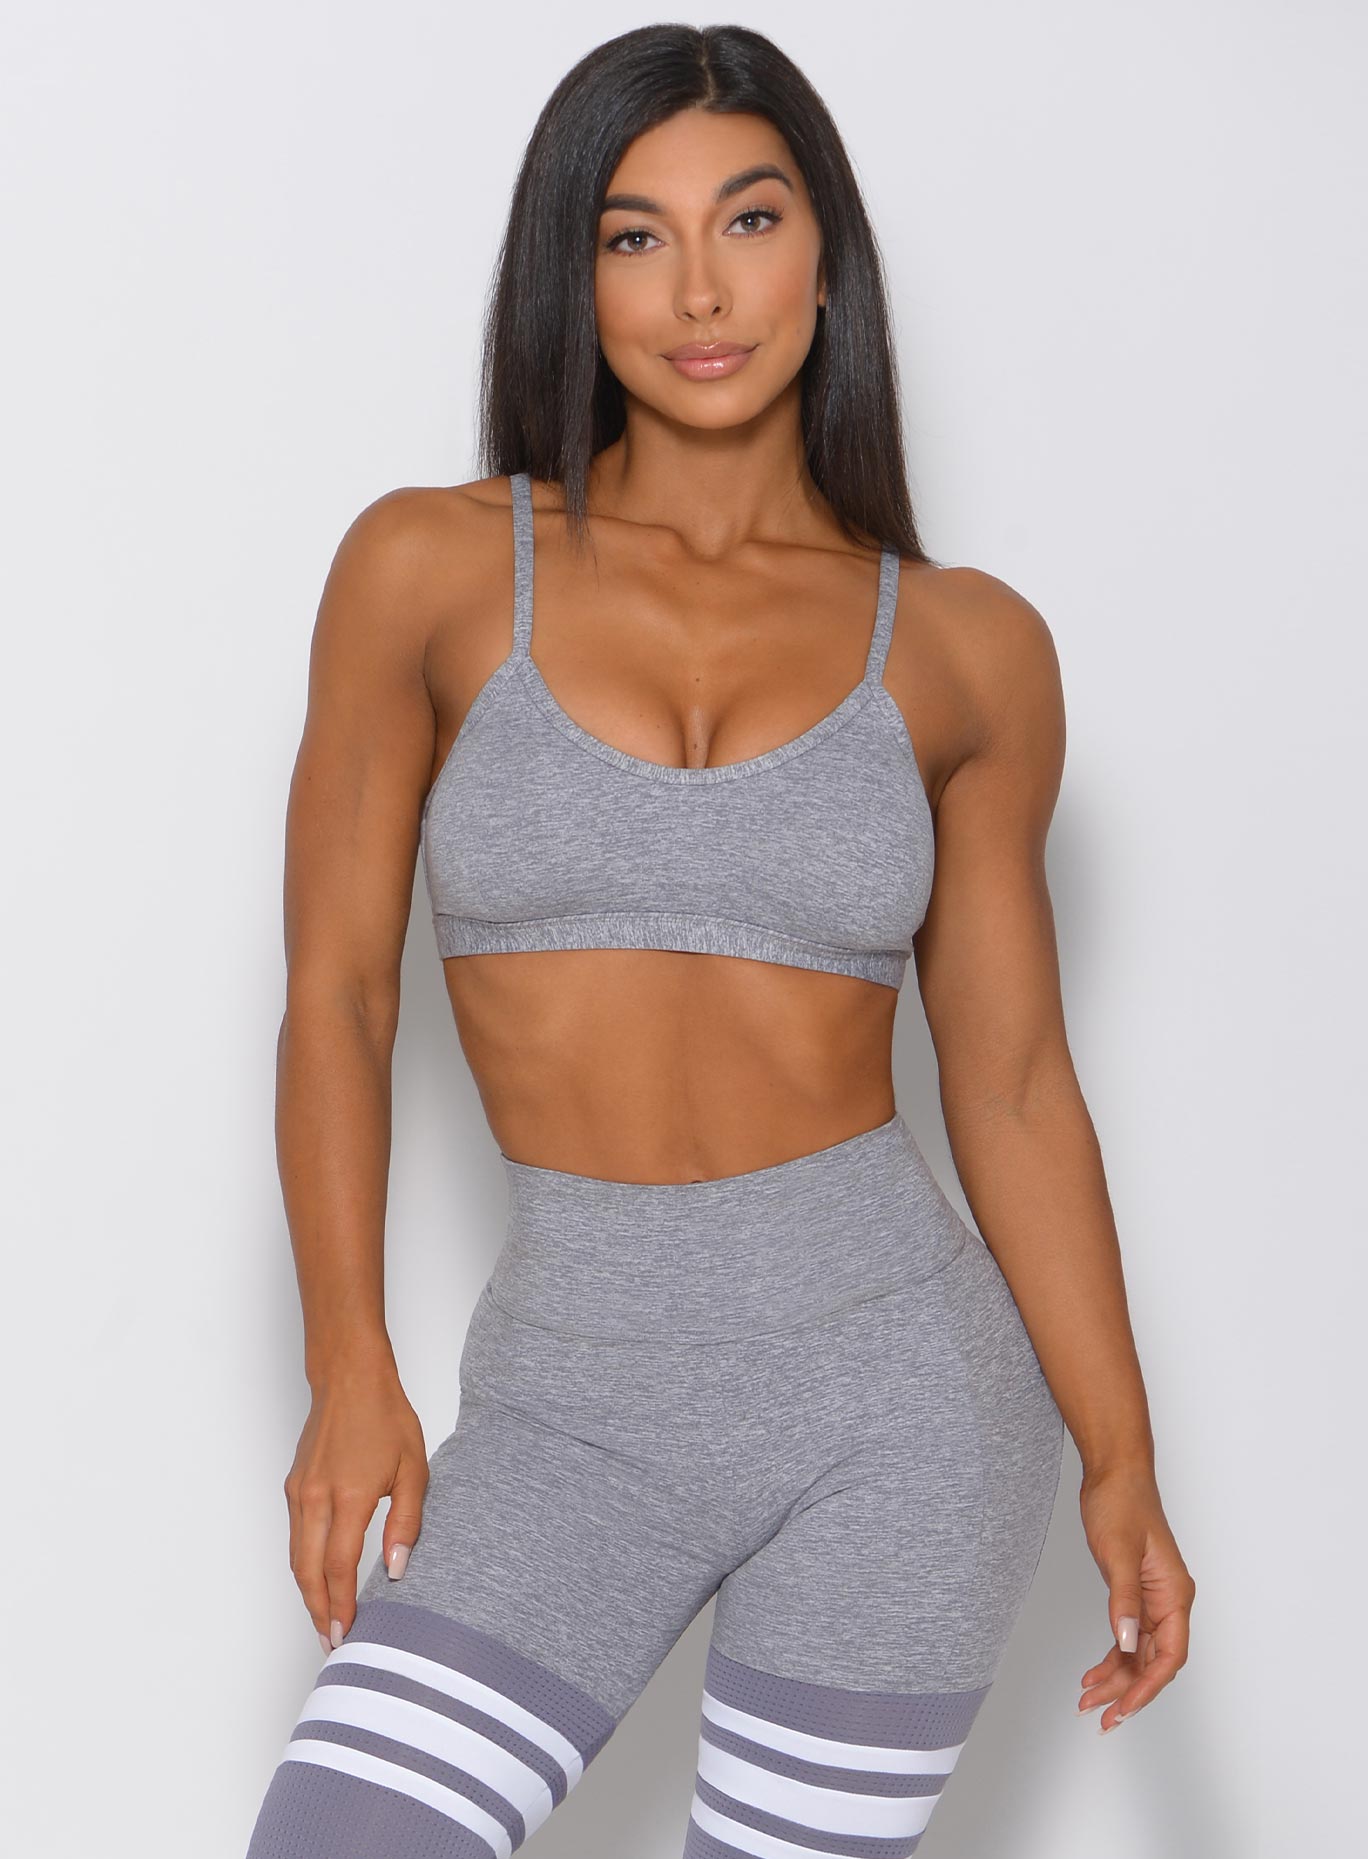 Model facing forward in grey sports bra and matching high waisted leggings